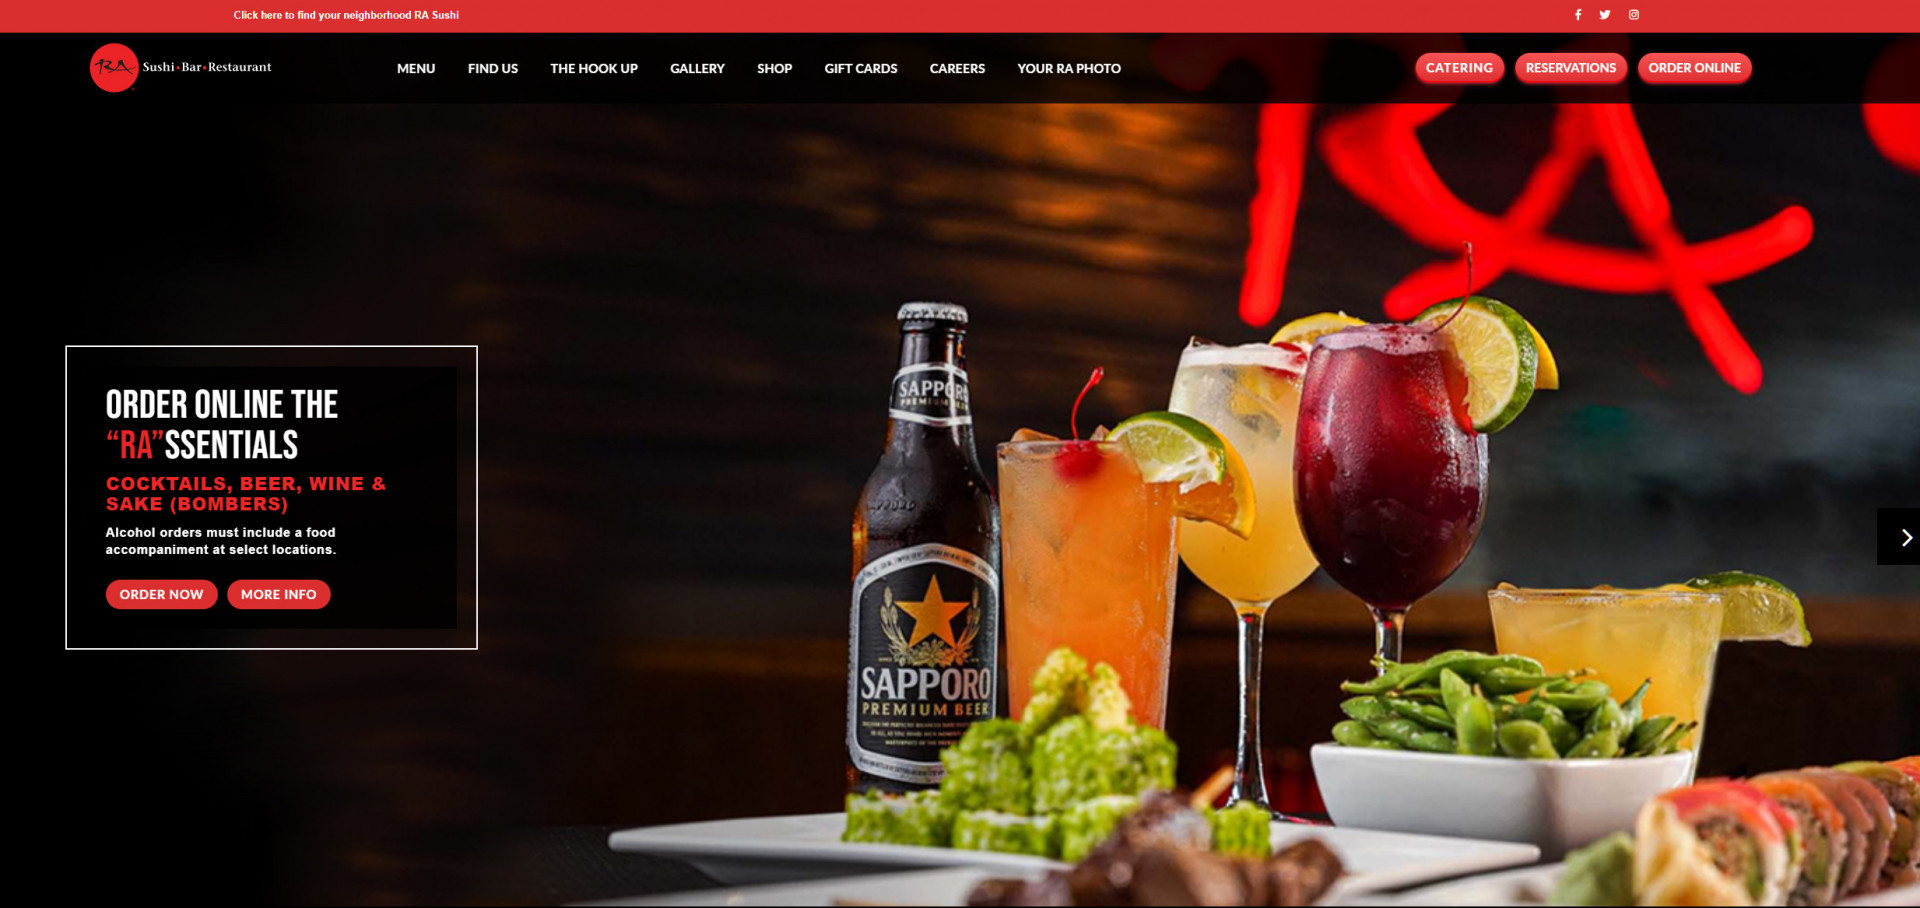 One of the top beautiful restaurant websites for bars